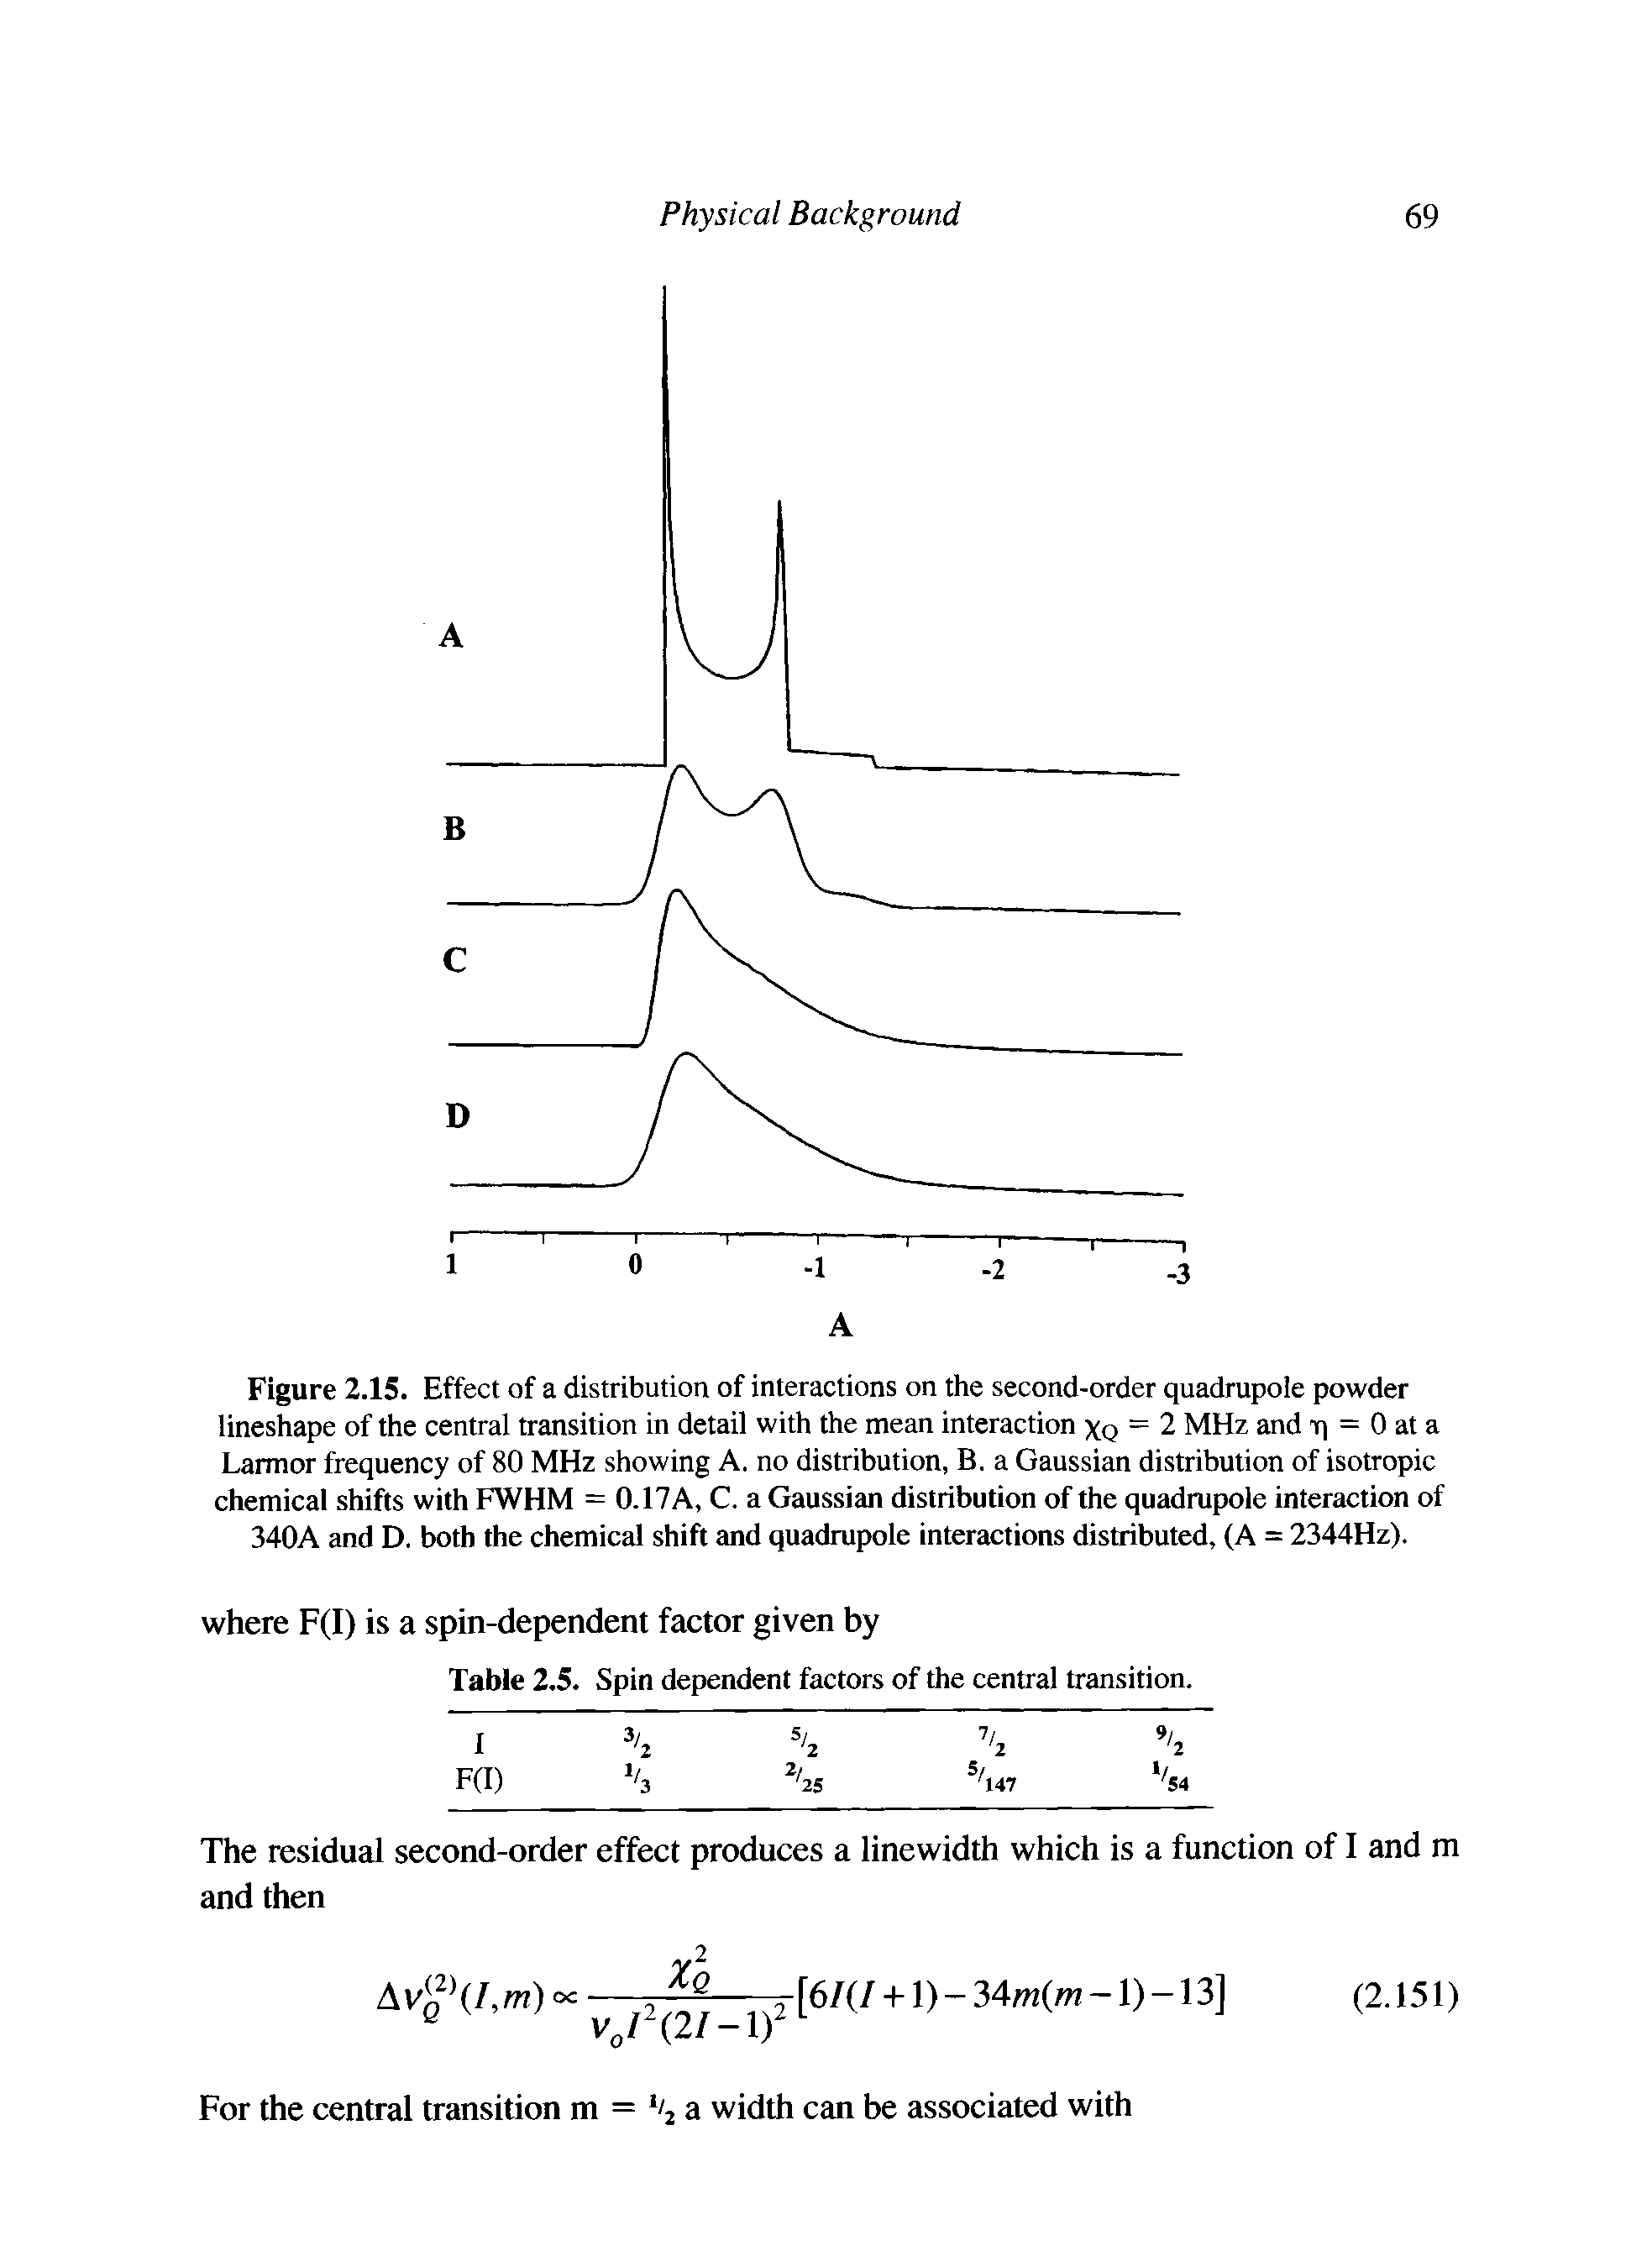 Figure 2.15. Effect of a distribution of interactions on the second-order quadrupole powder lineshape of the central transition in detail with the mean interaction Xq = 2 MHz and -ri = 0 at a Larmor frequency of 80 MHz showing A. no distribution, B. a Gaussian distribution of isotropic chemical shifts with FWHM = 0.17 A, C. a Gaussian distribution of the quadrupole interaction of 340A and D. both the chemical shift and quadrupole interactions distributed, (A = 2344Hz).